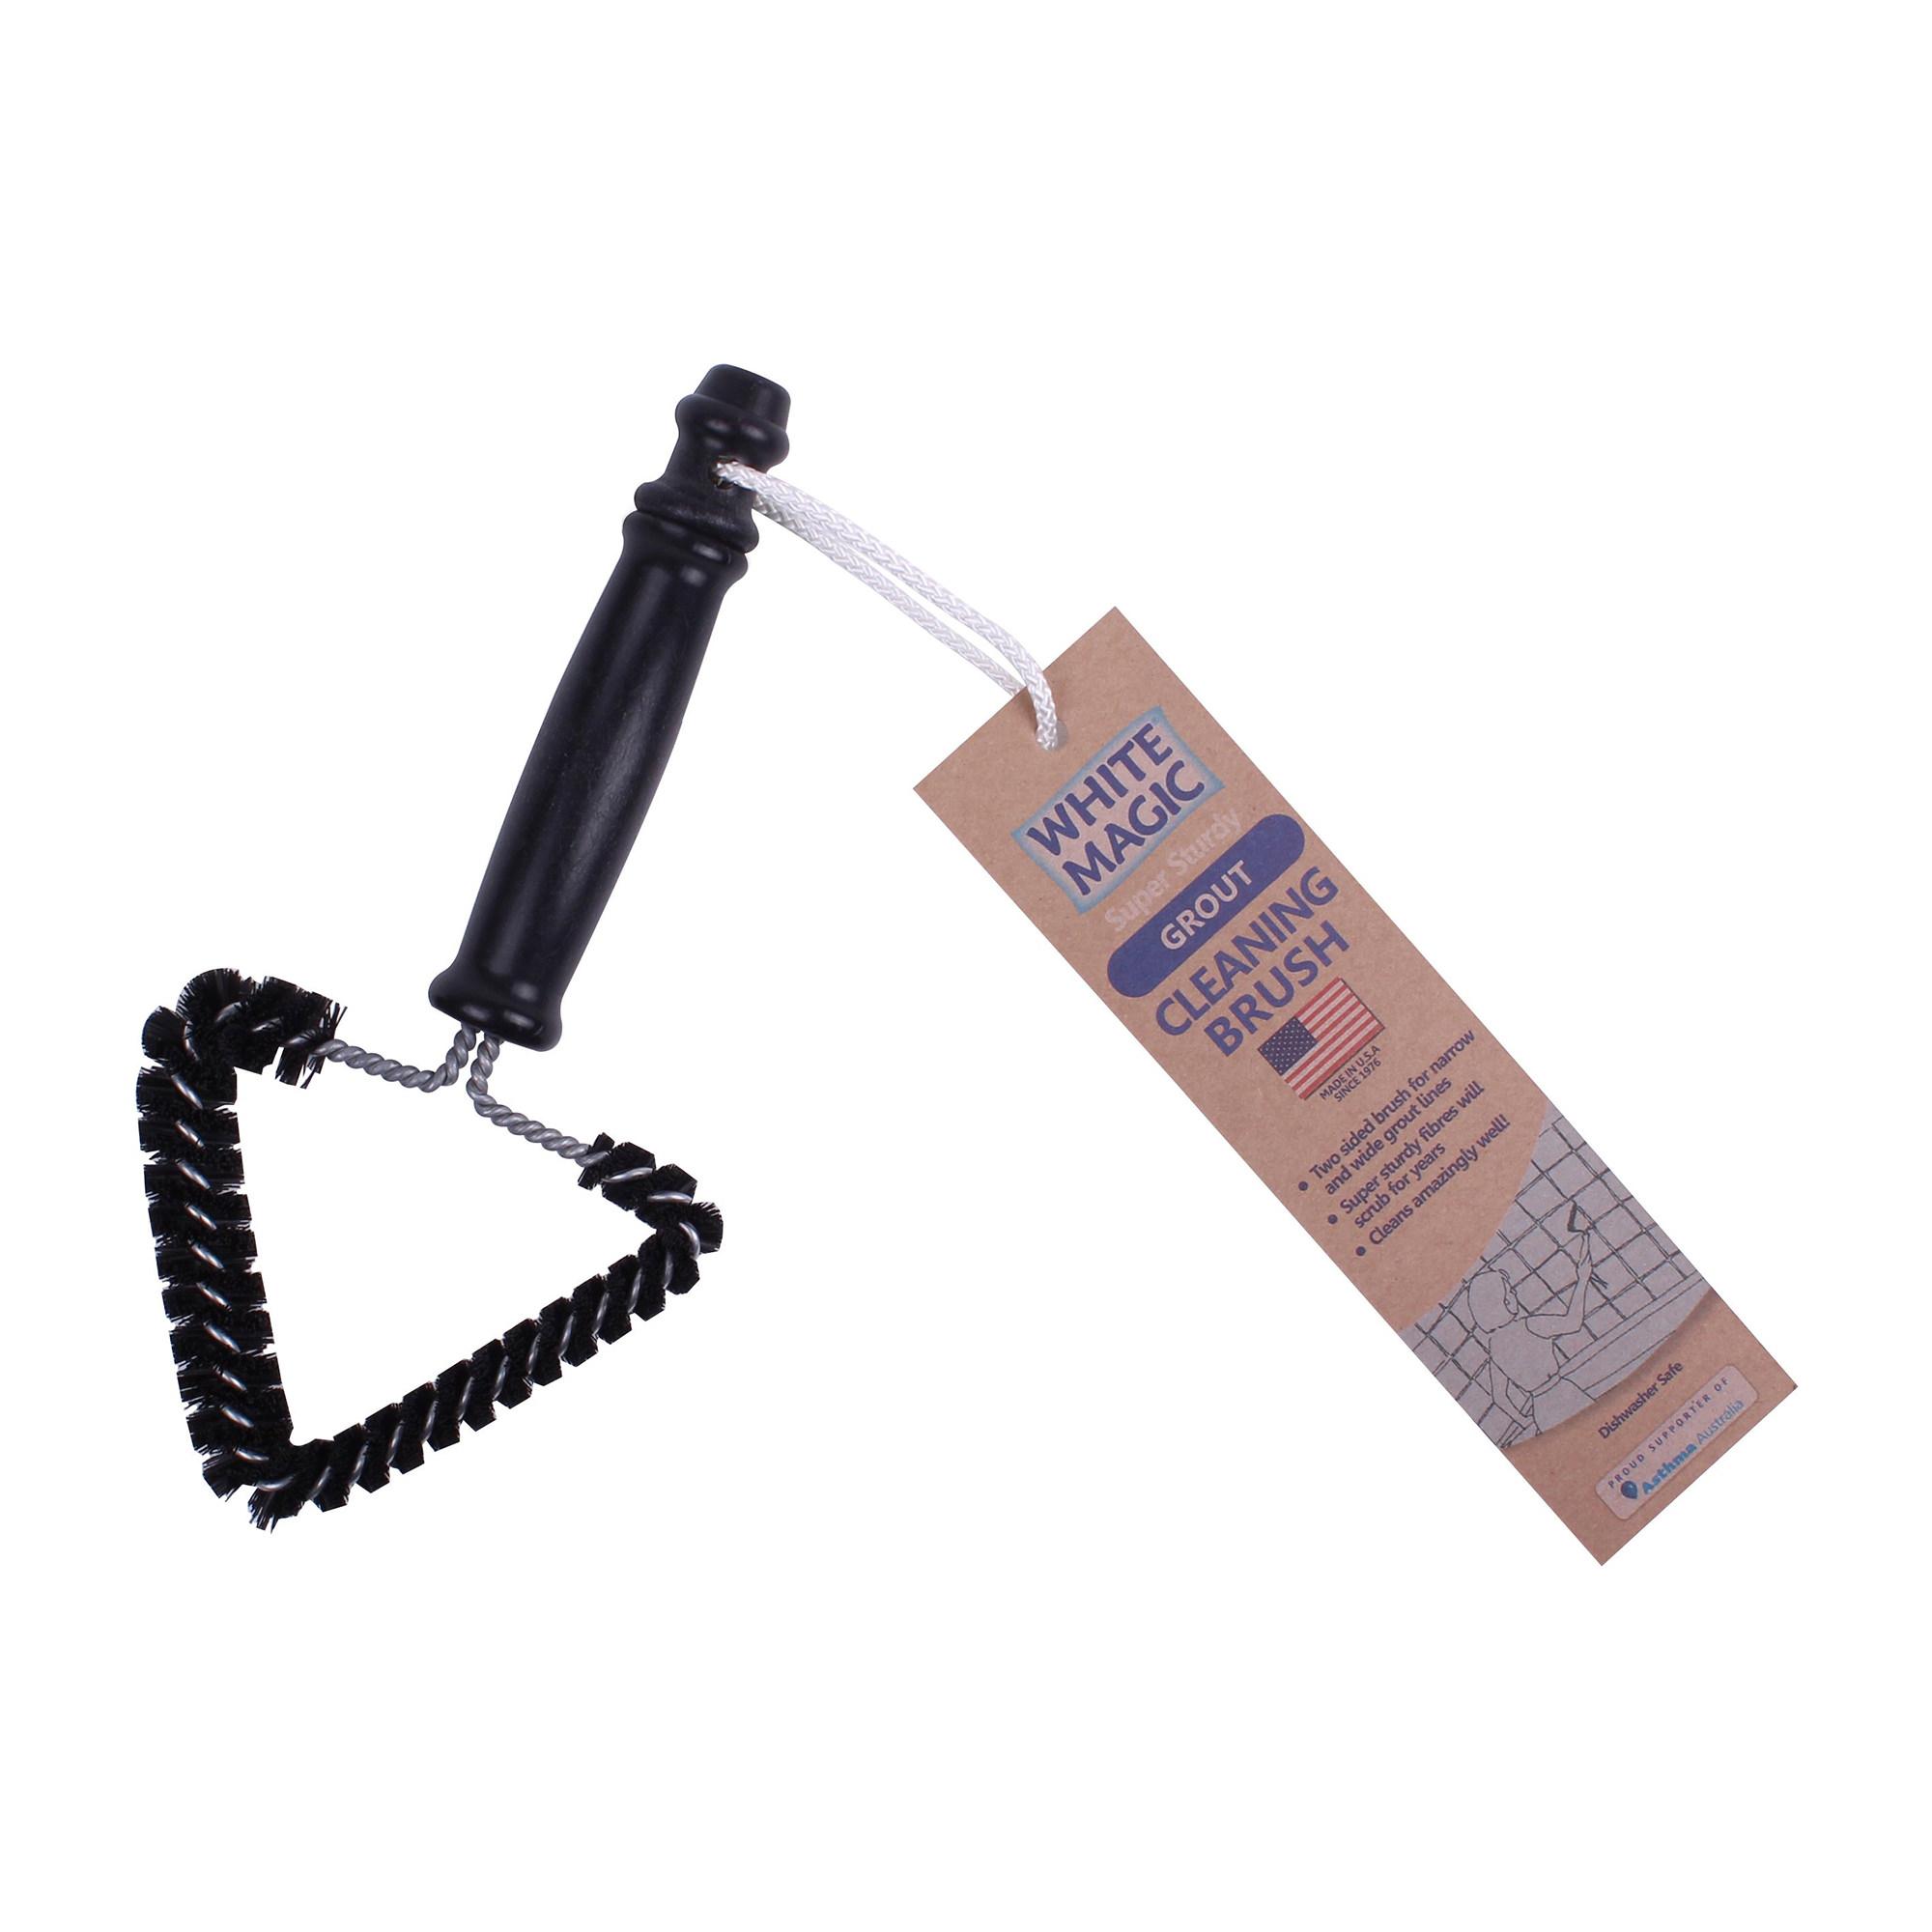 White Magic Super Sturdy Grout Cleaning Brush Black Image 2